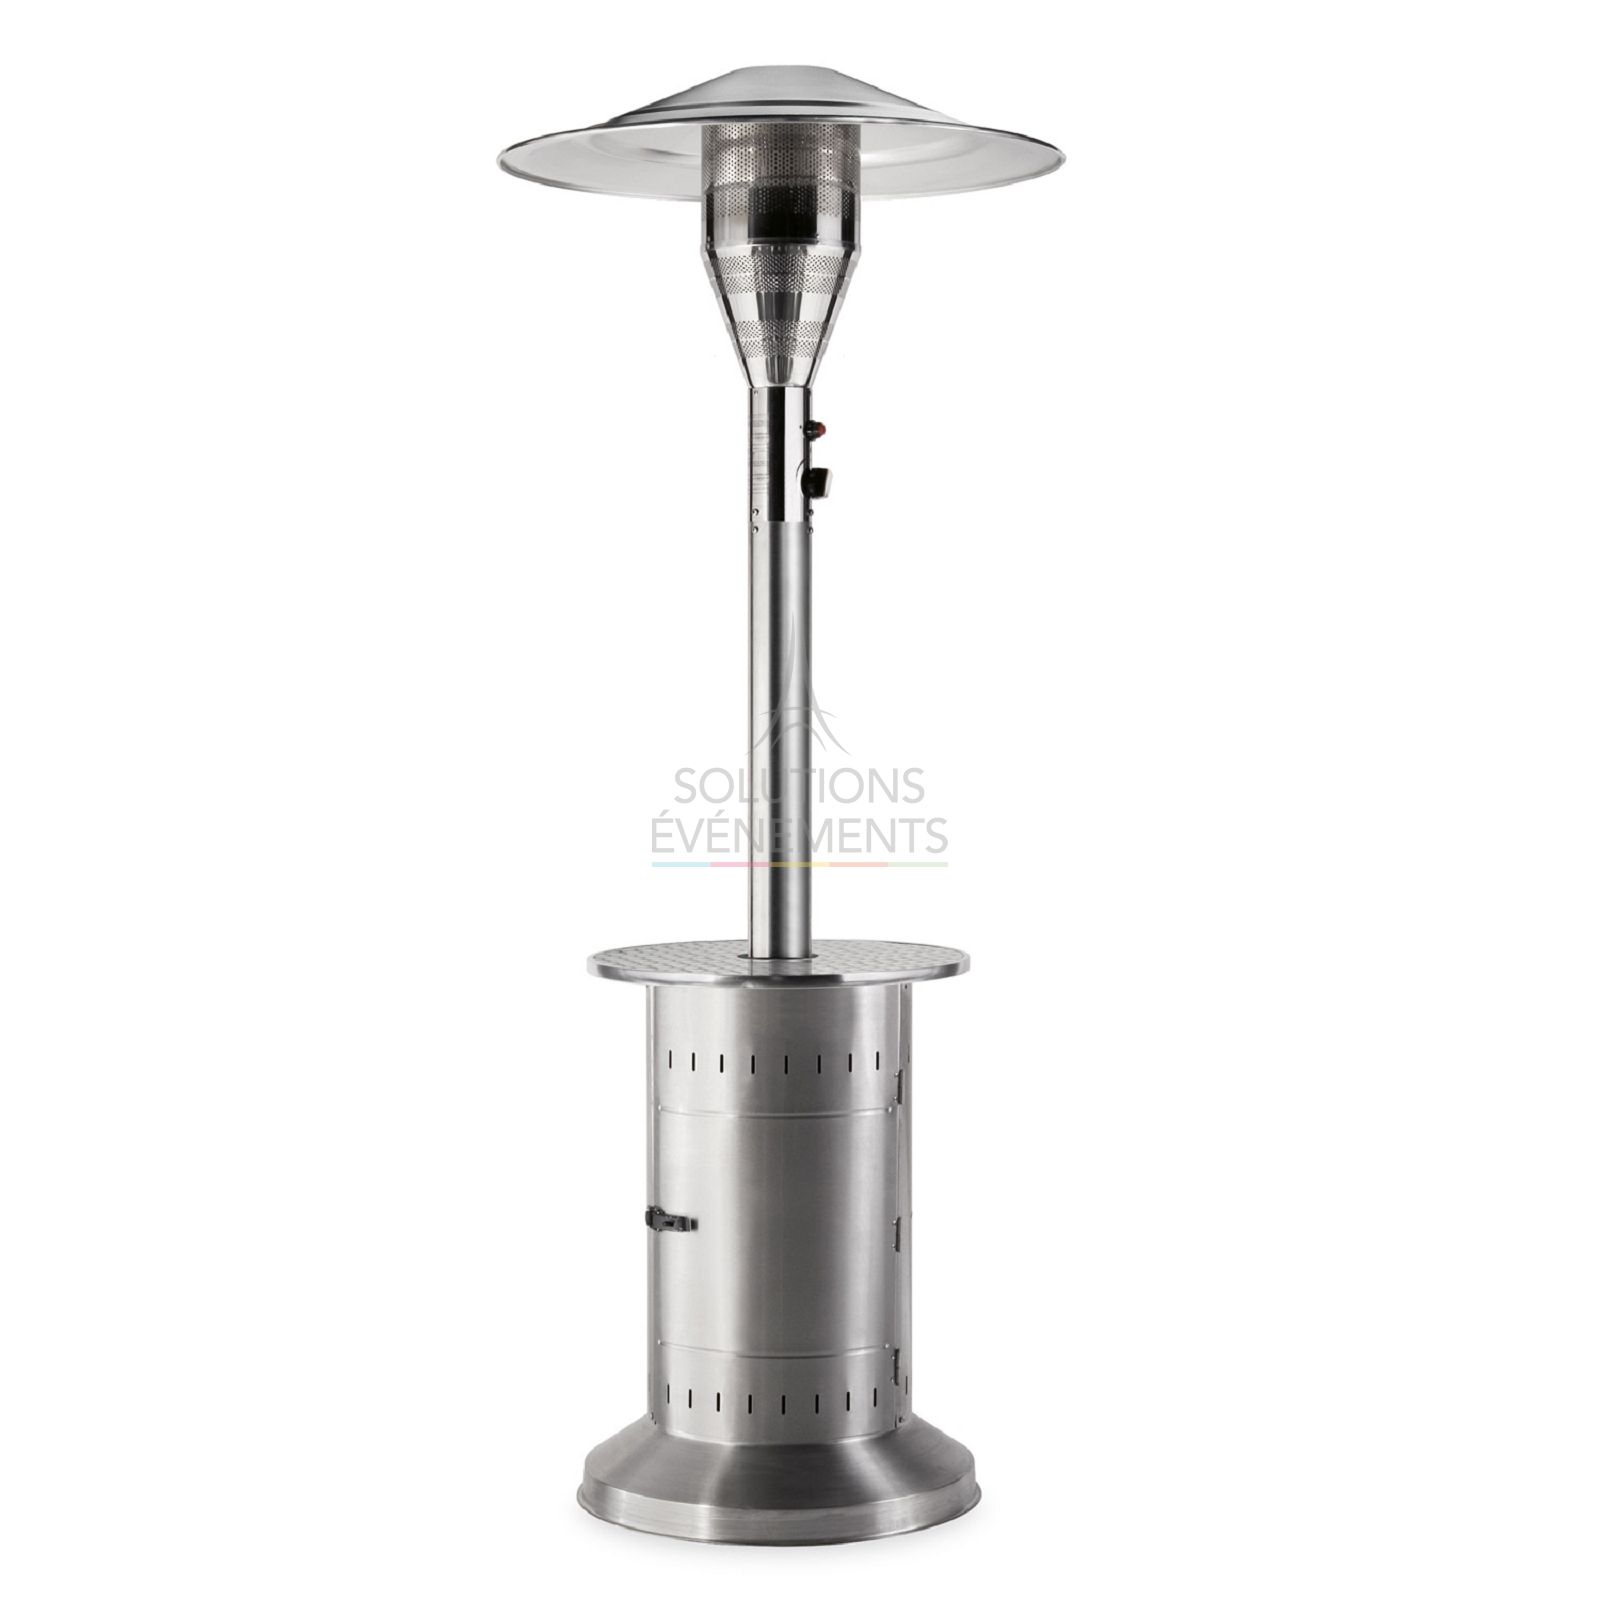 Rental of mushroom parasol heaters and patio heaters for events